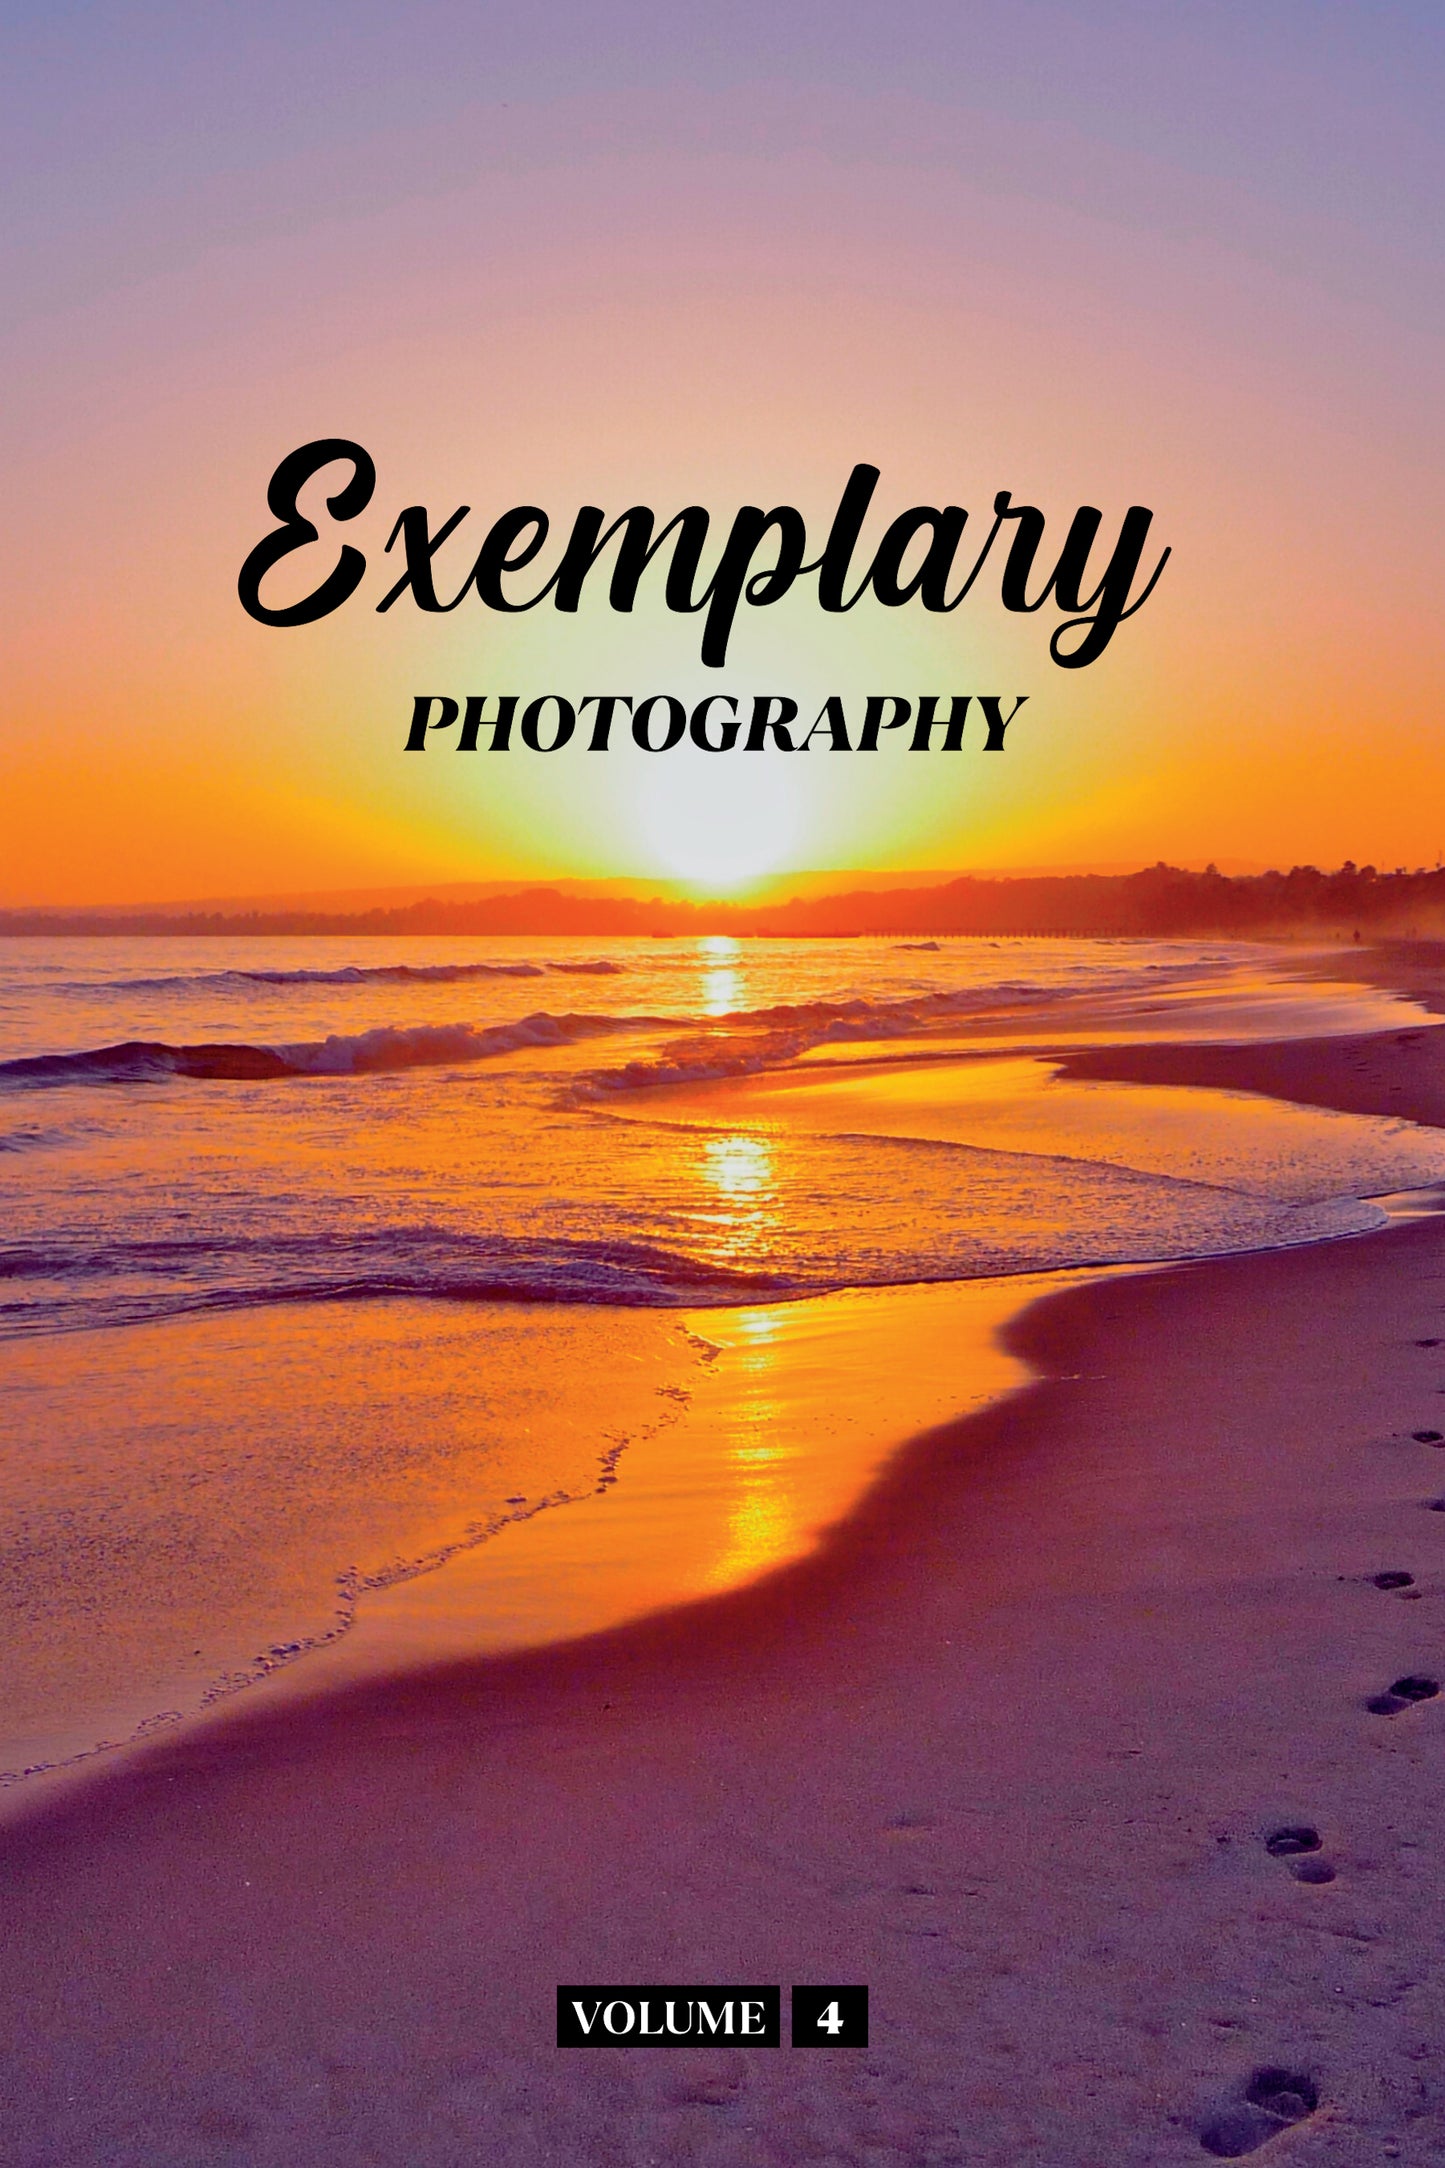 Exemplary Photography Volume 4 (Physical Book)